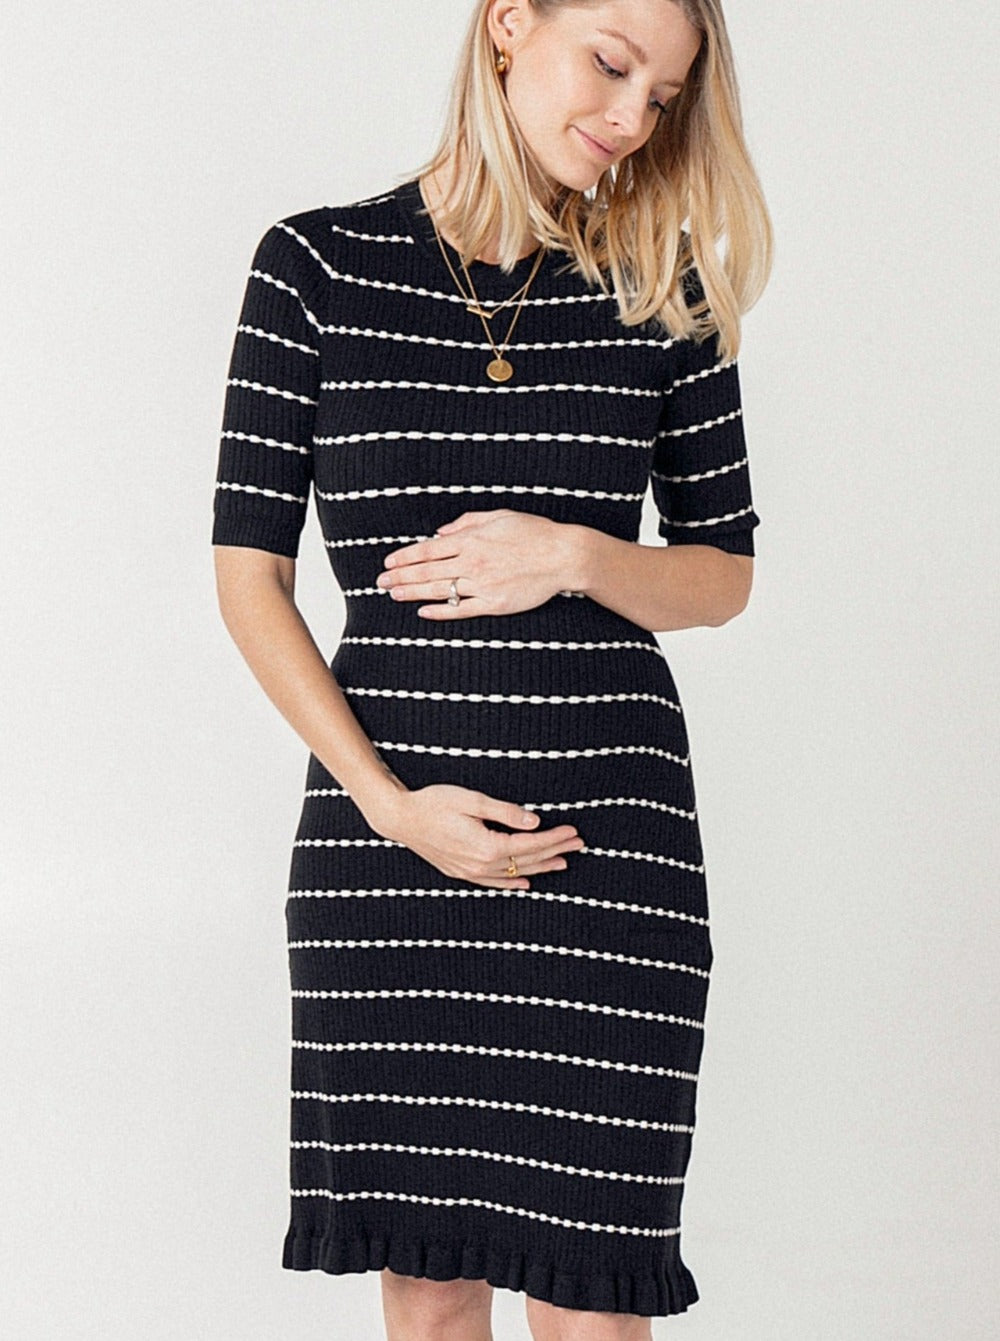 Striped knit maternity sweater dress. This flattering pregnancy dress by MARION features 3/4 sleeves, luxury cotton knit fabric, classic round neck, and feminine hemline. Maternity workwear, maternity wedding guest dress, or baby shower dress. Petite friendly.